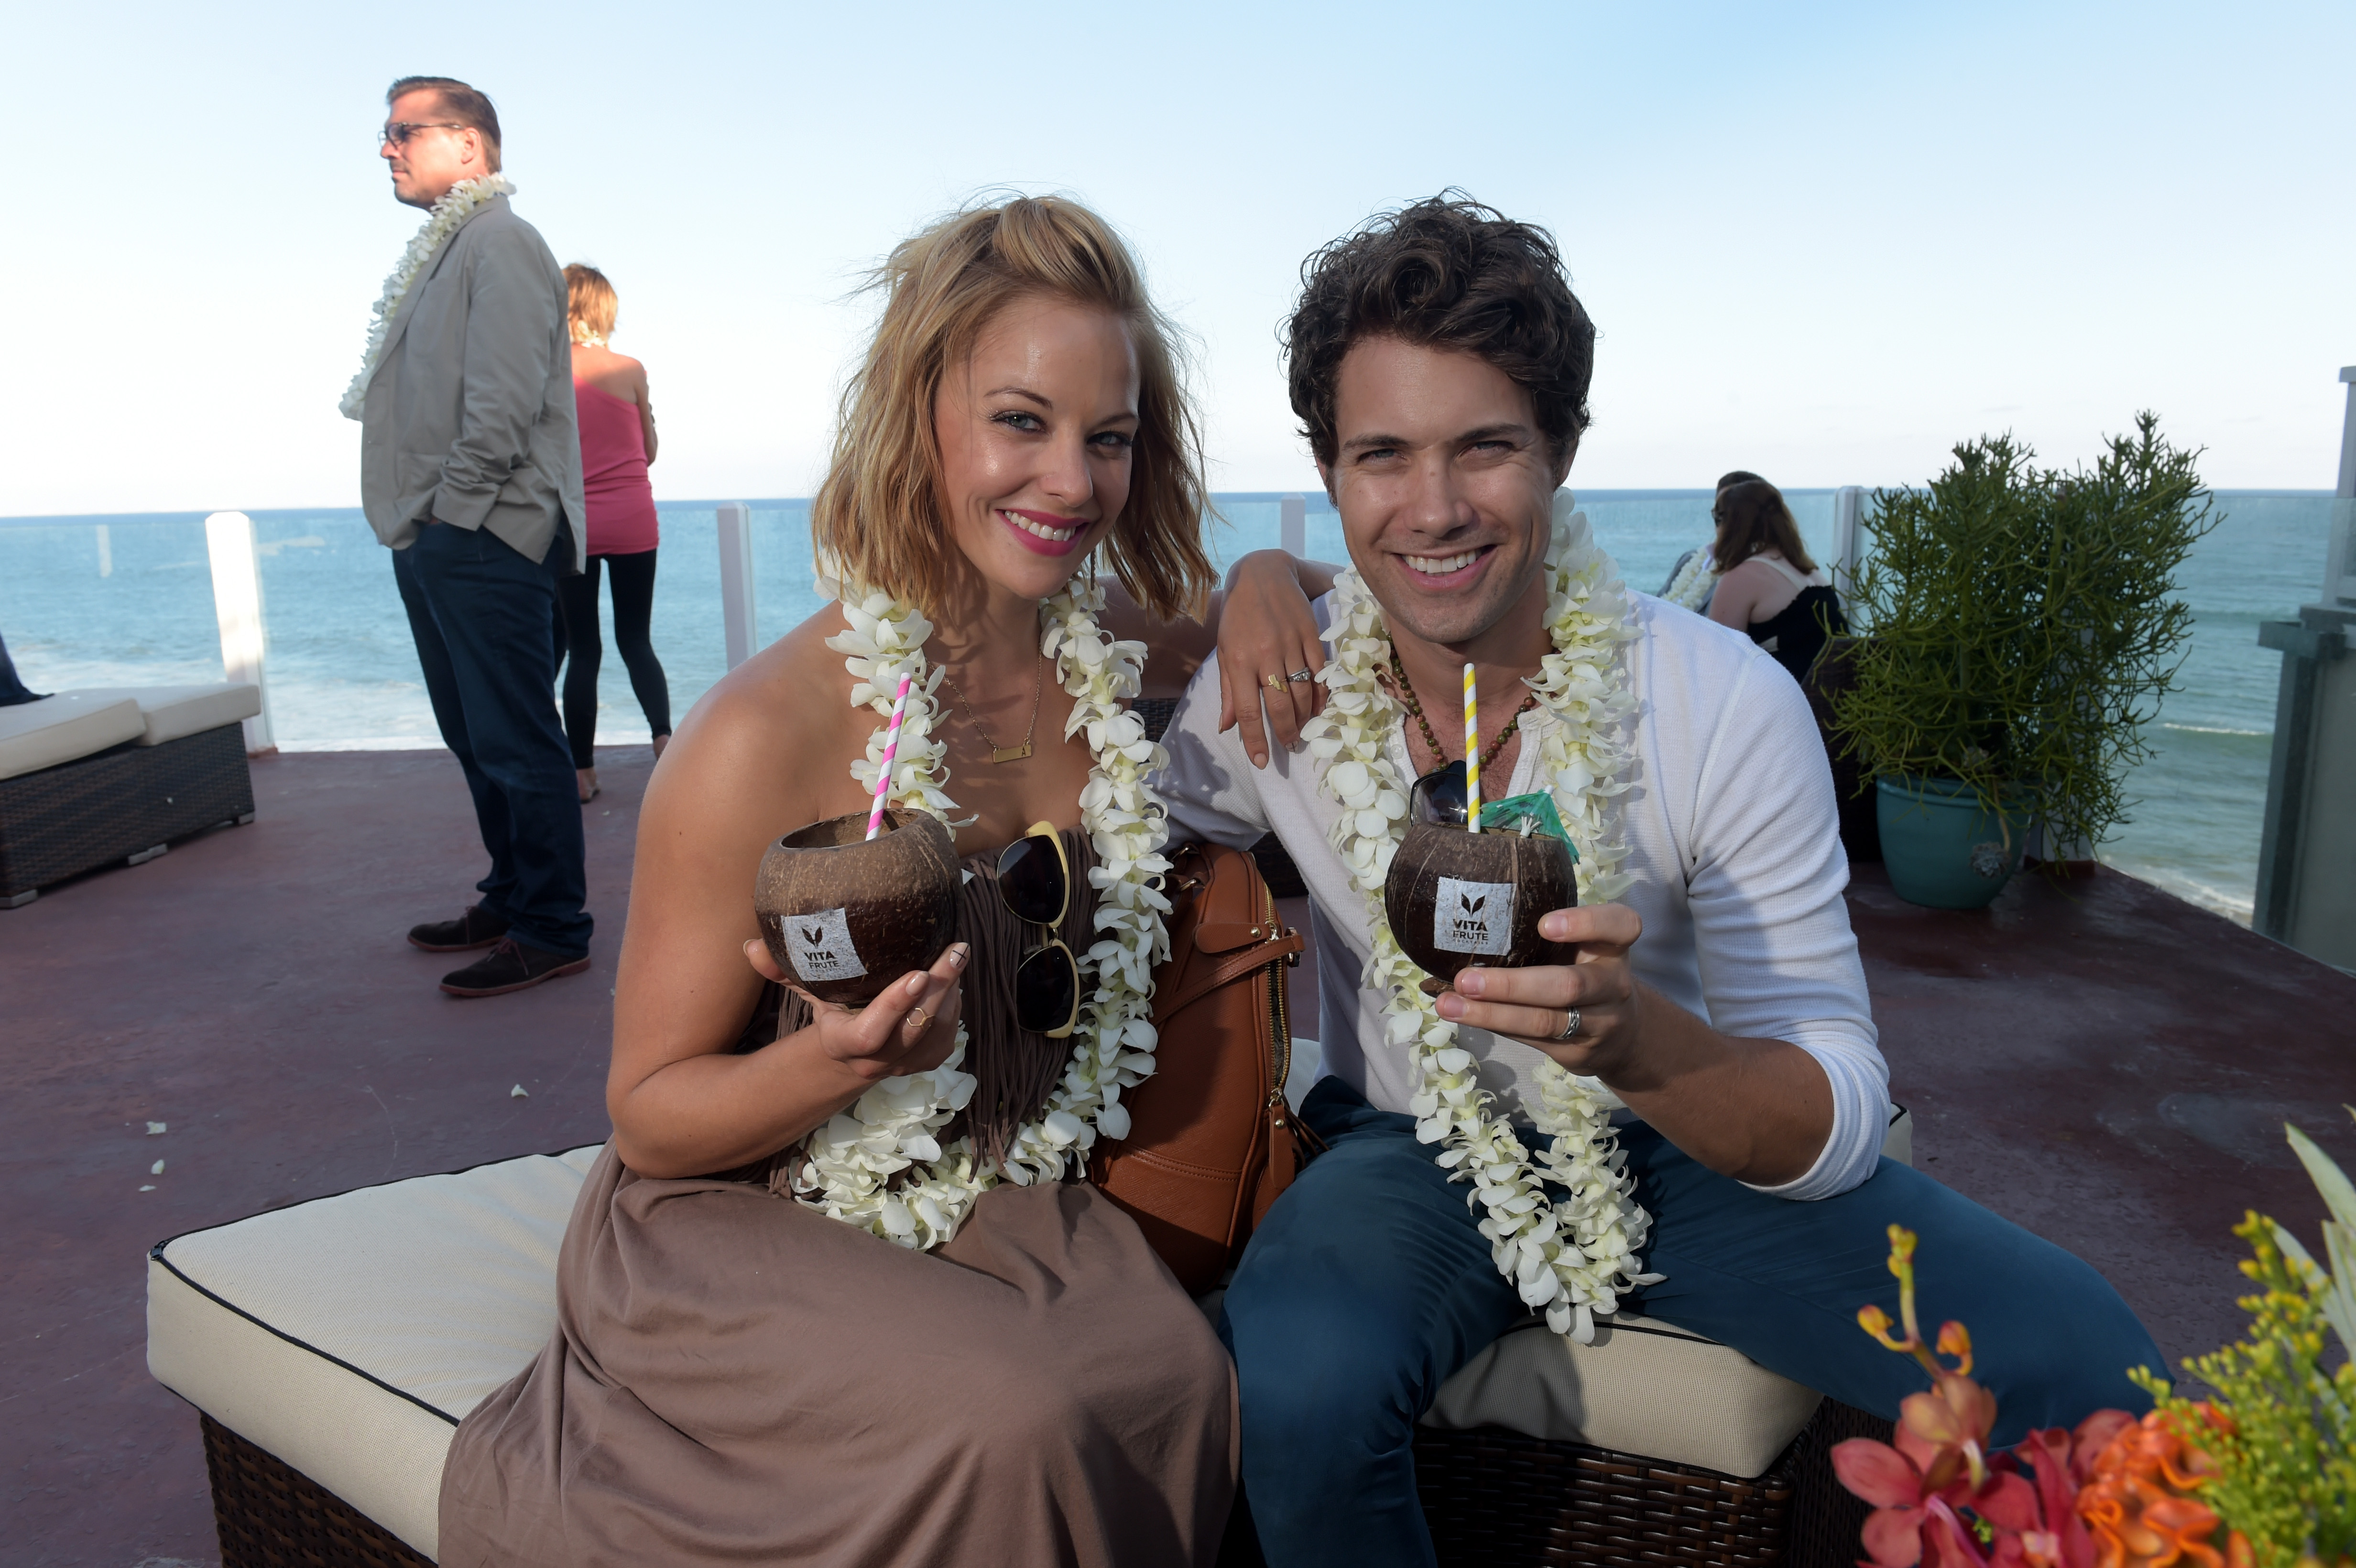 Actors Amy Paffrath (L) and Drew Seeley attend the VitaFrute Cocktails by VEEV Coconut Colada Launch at Beach Haus Malibu on August 13, 2014 in Malibu, California